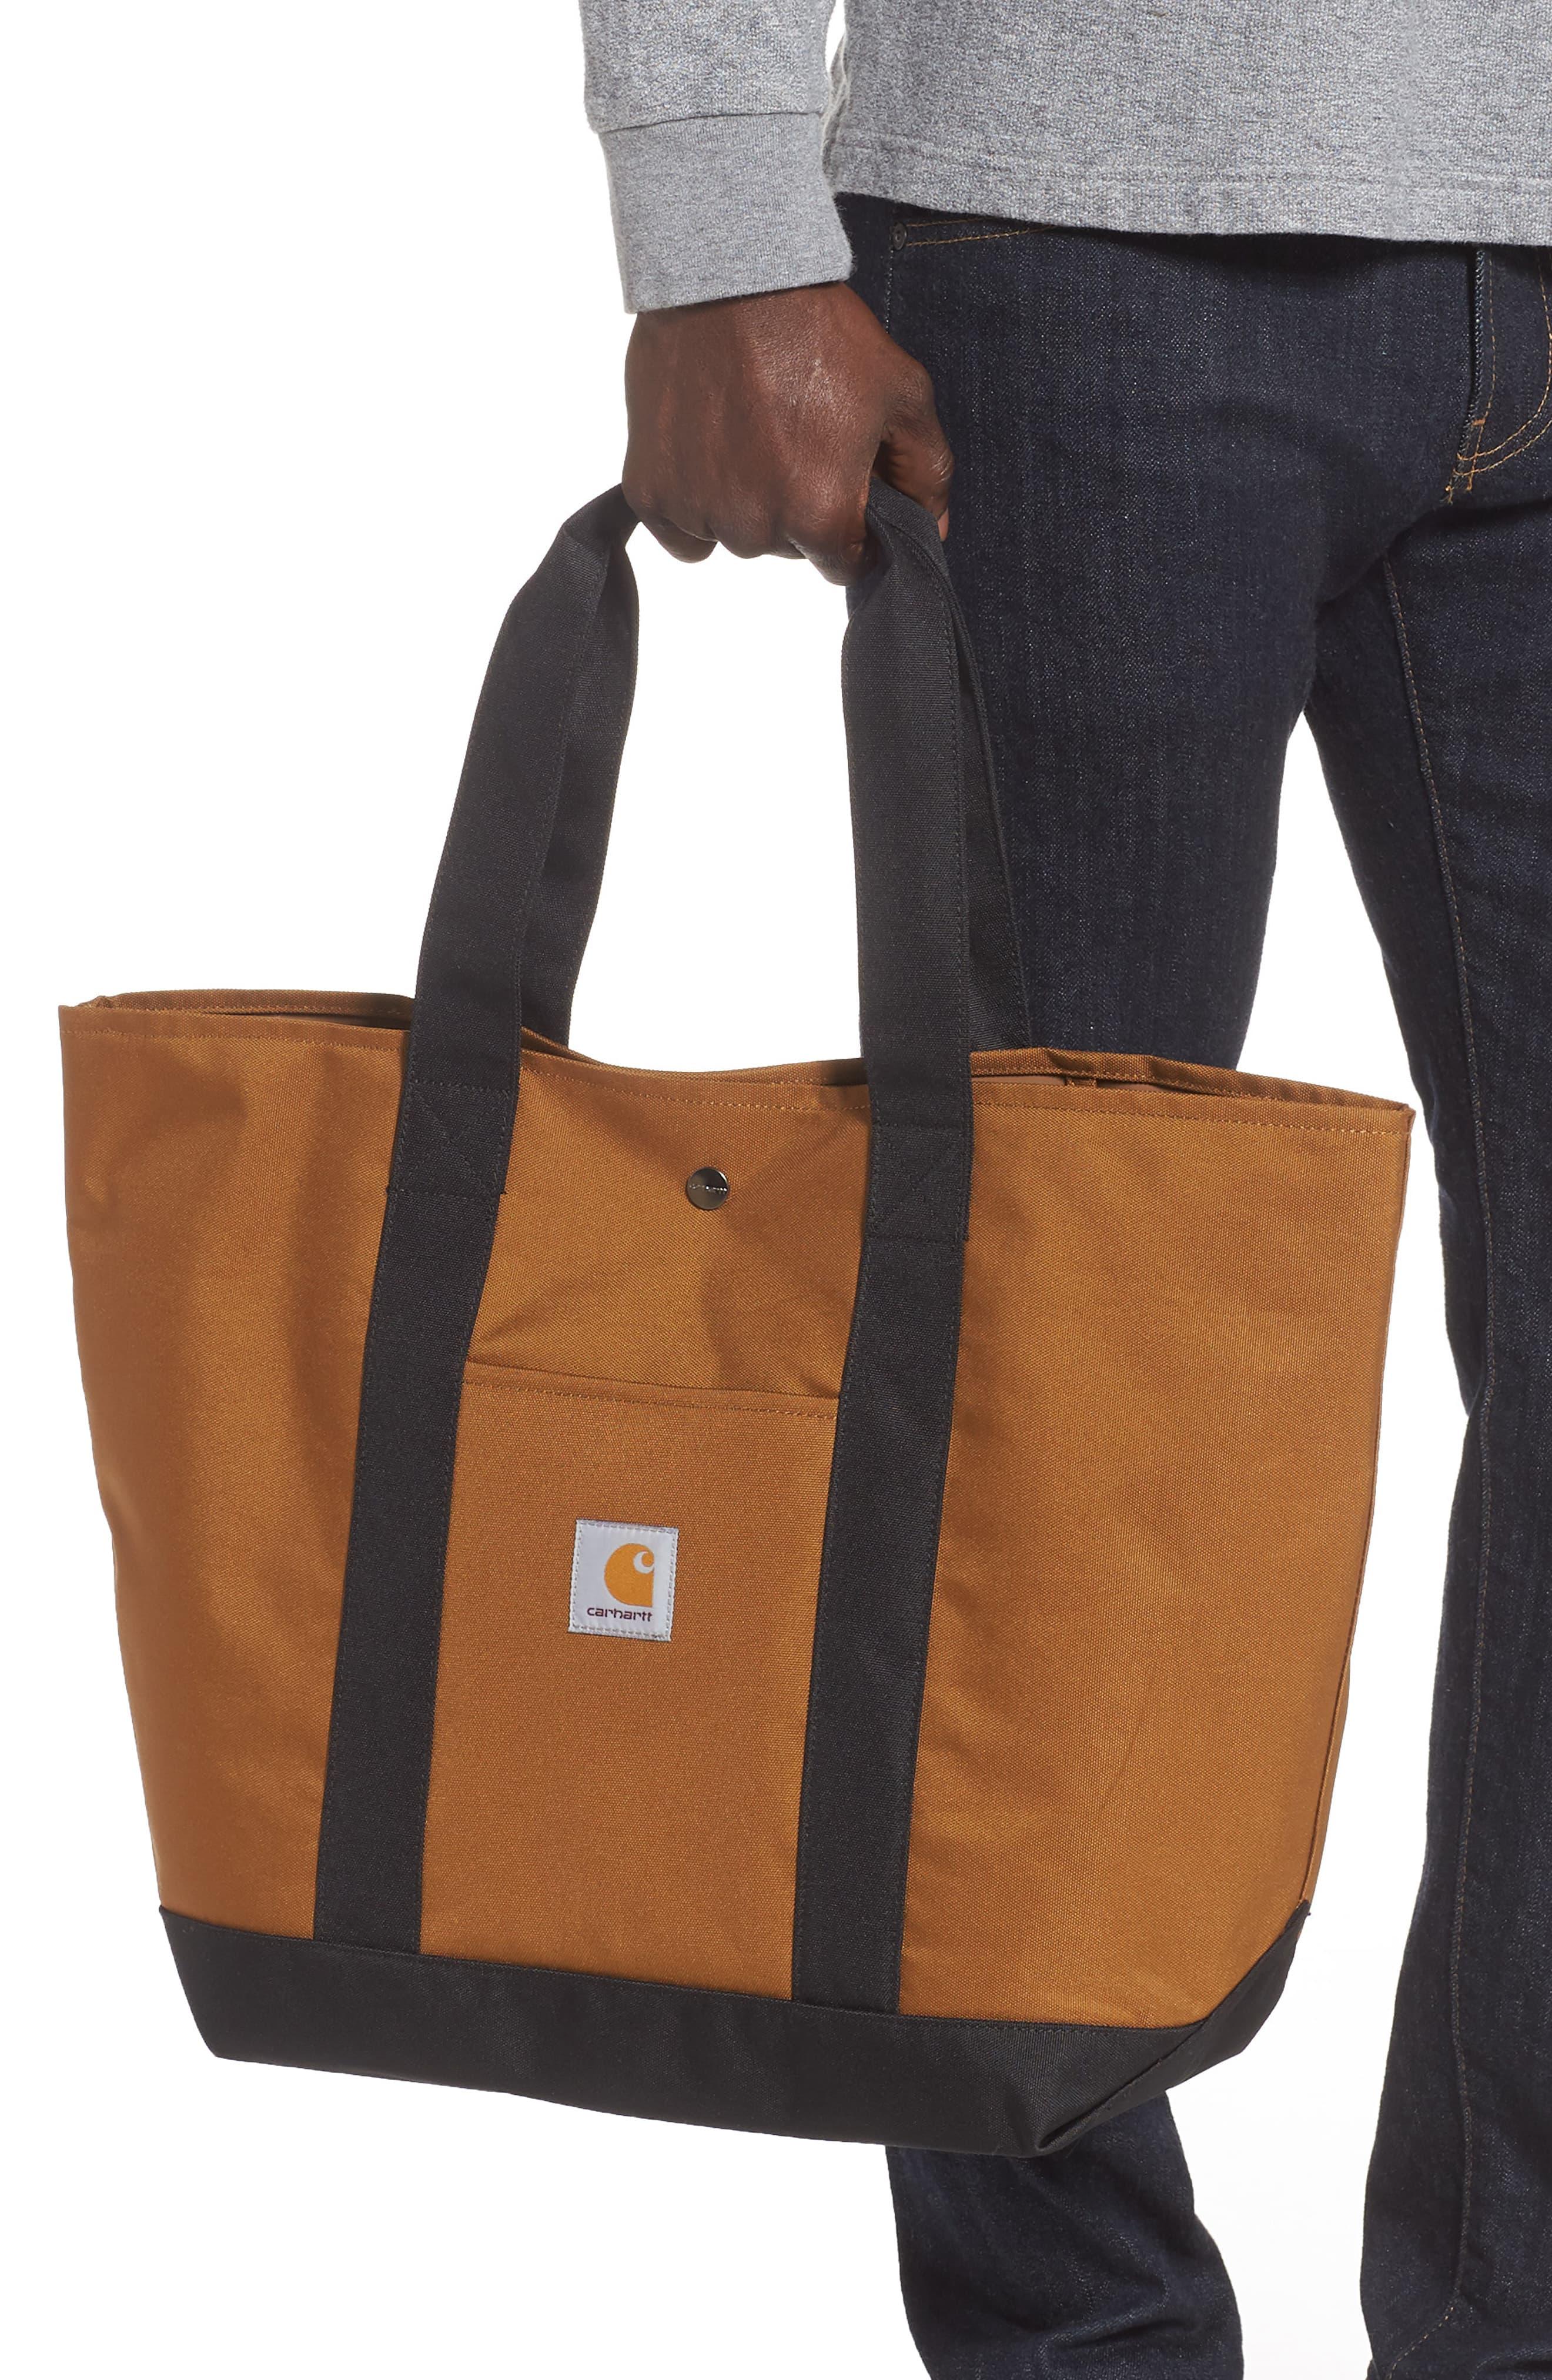 Simple Tote Bag Carhartt Online Store, UP TO 61% OFF |  www.editorialelpirata.com